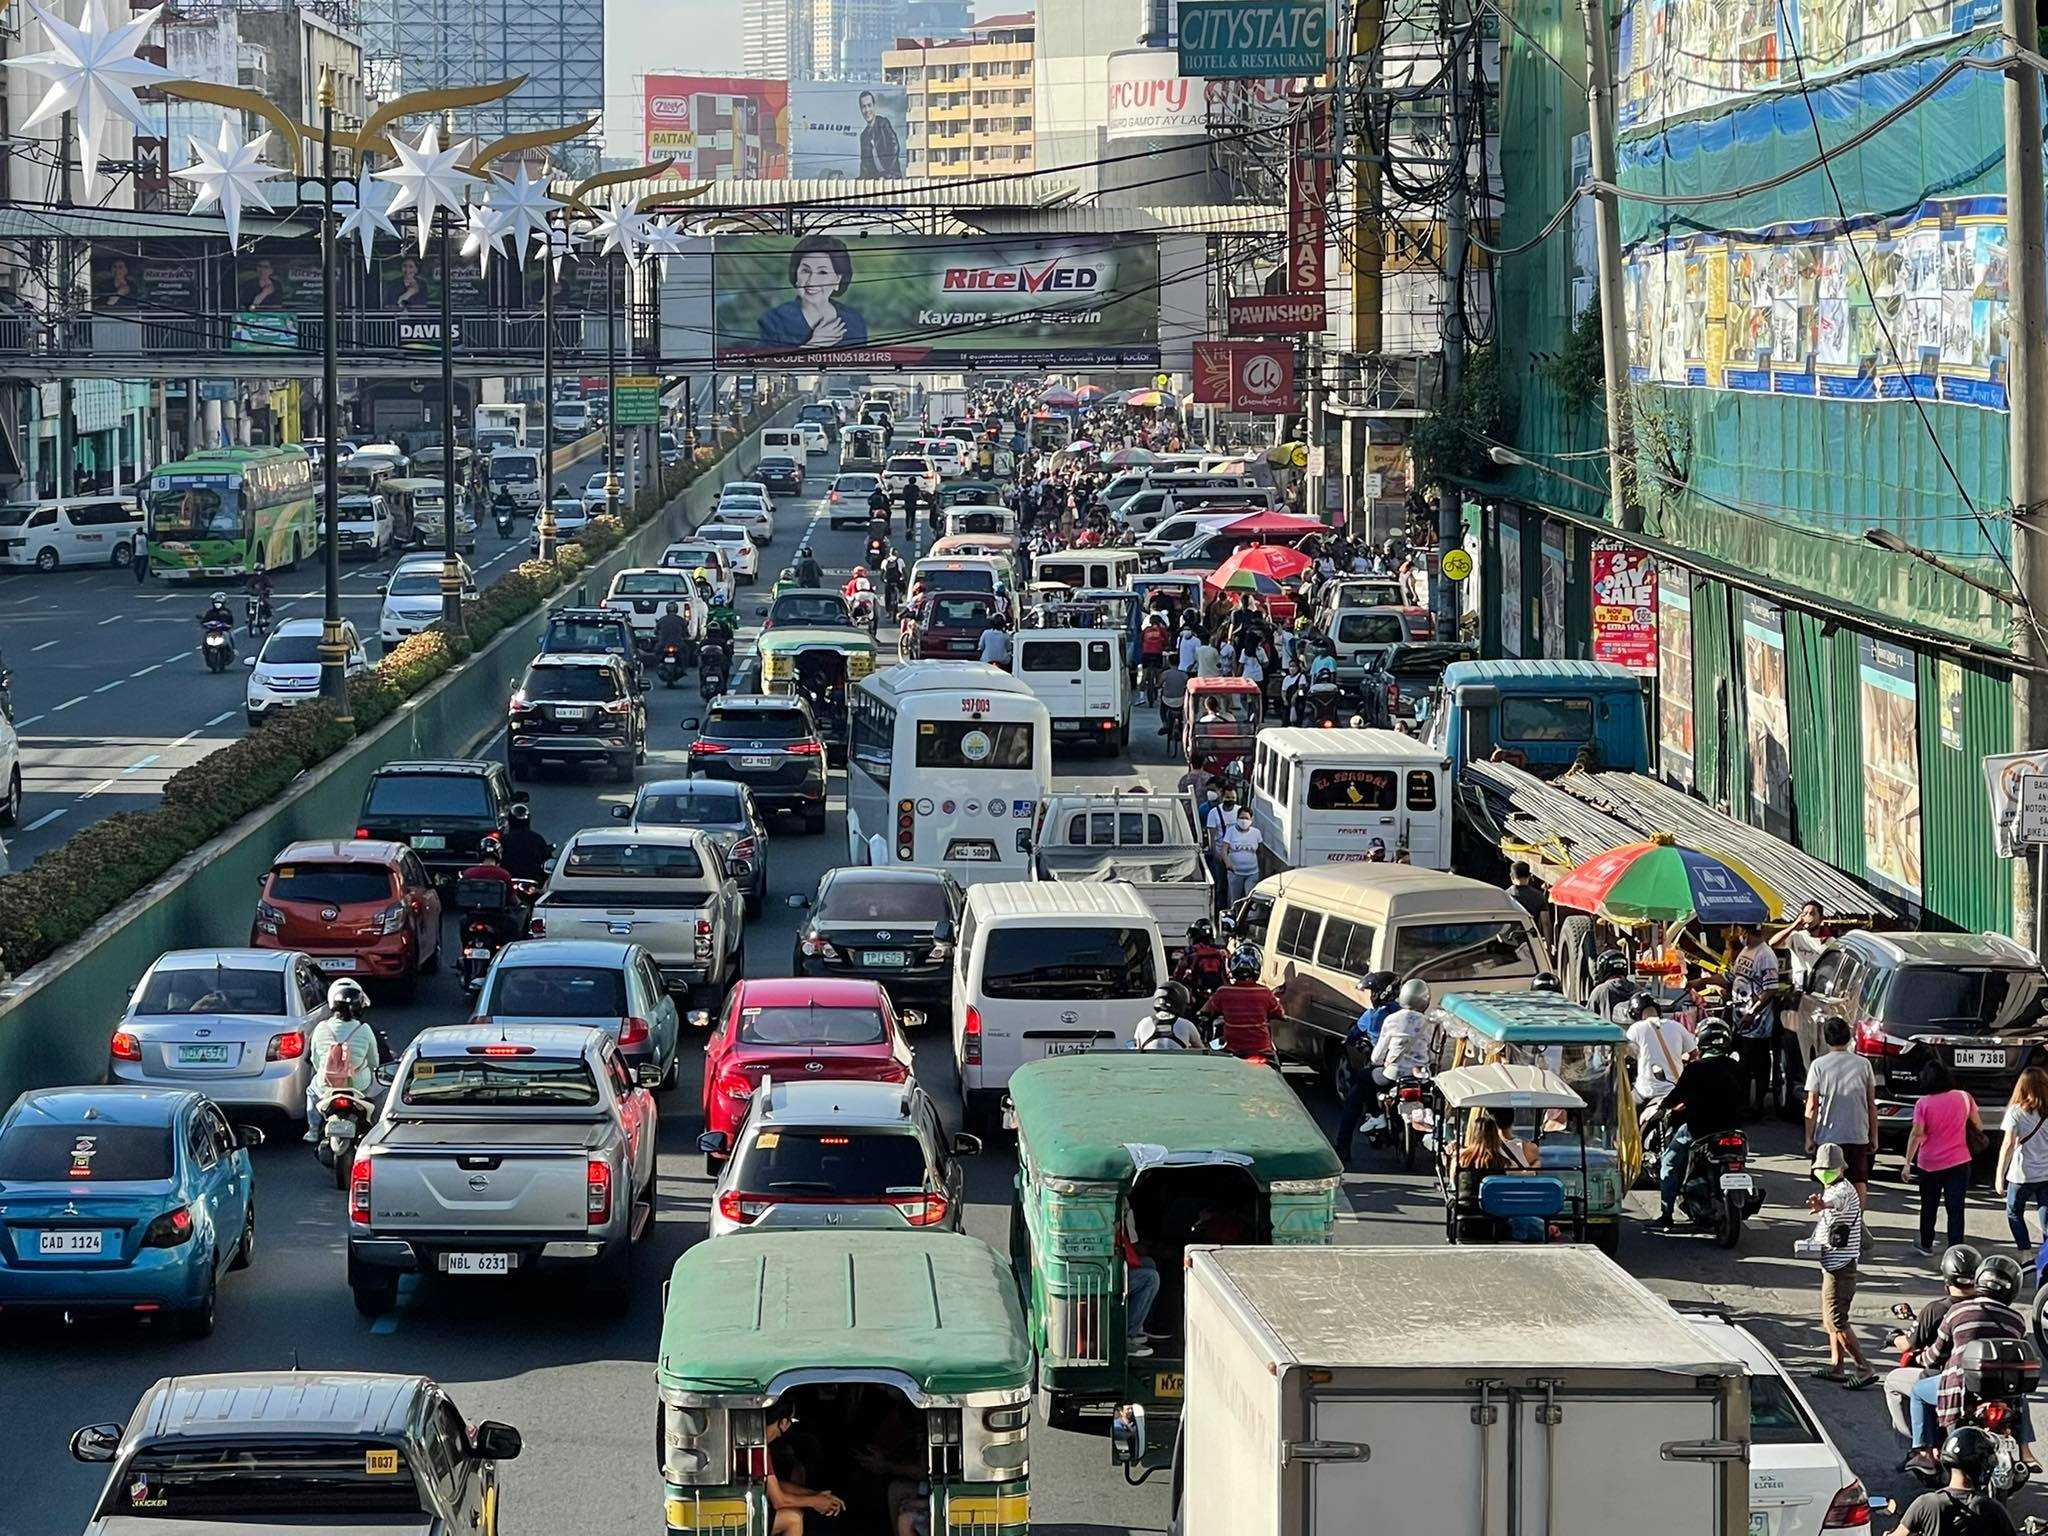 More than 63K PUVs benefit from first two days of fuel subsidy - LTFRB